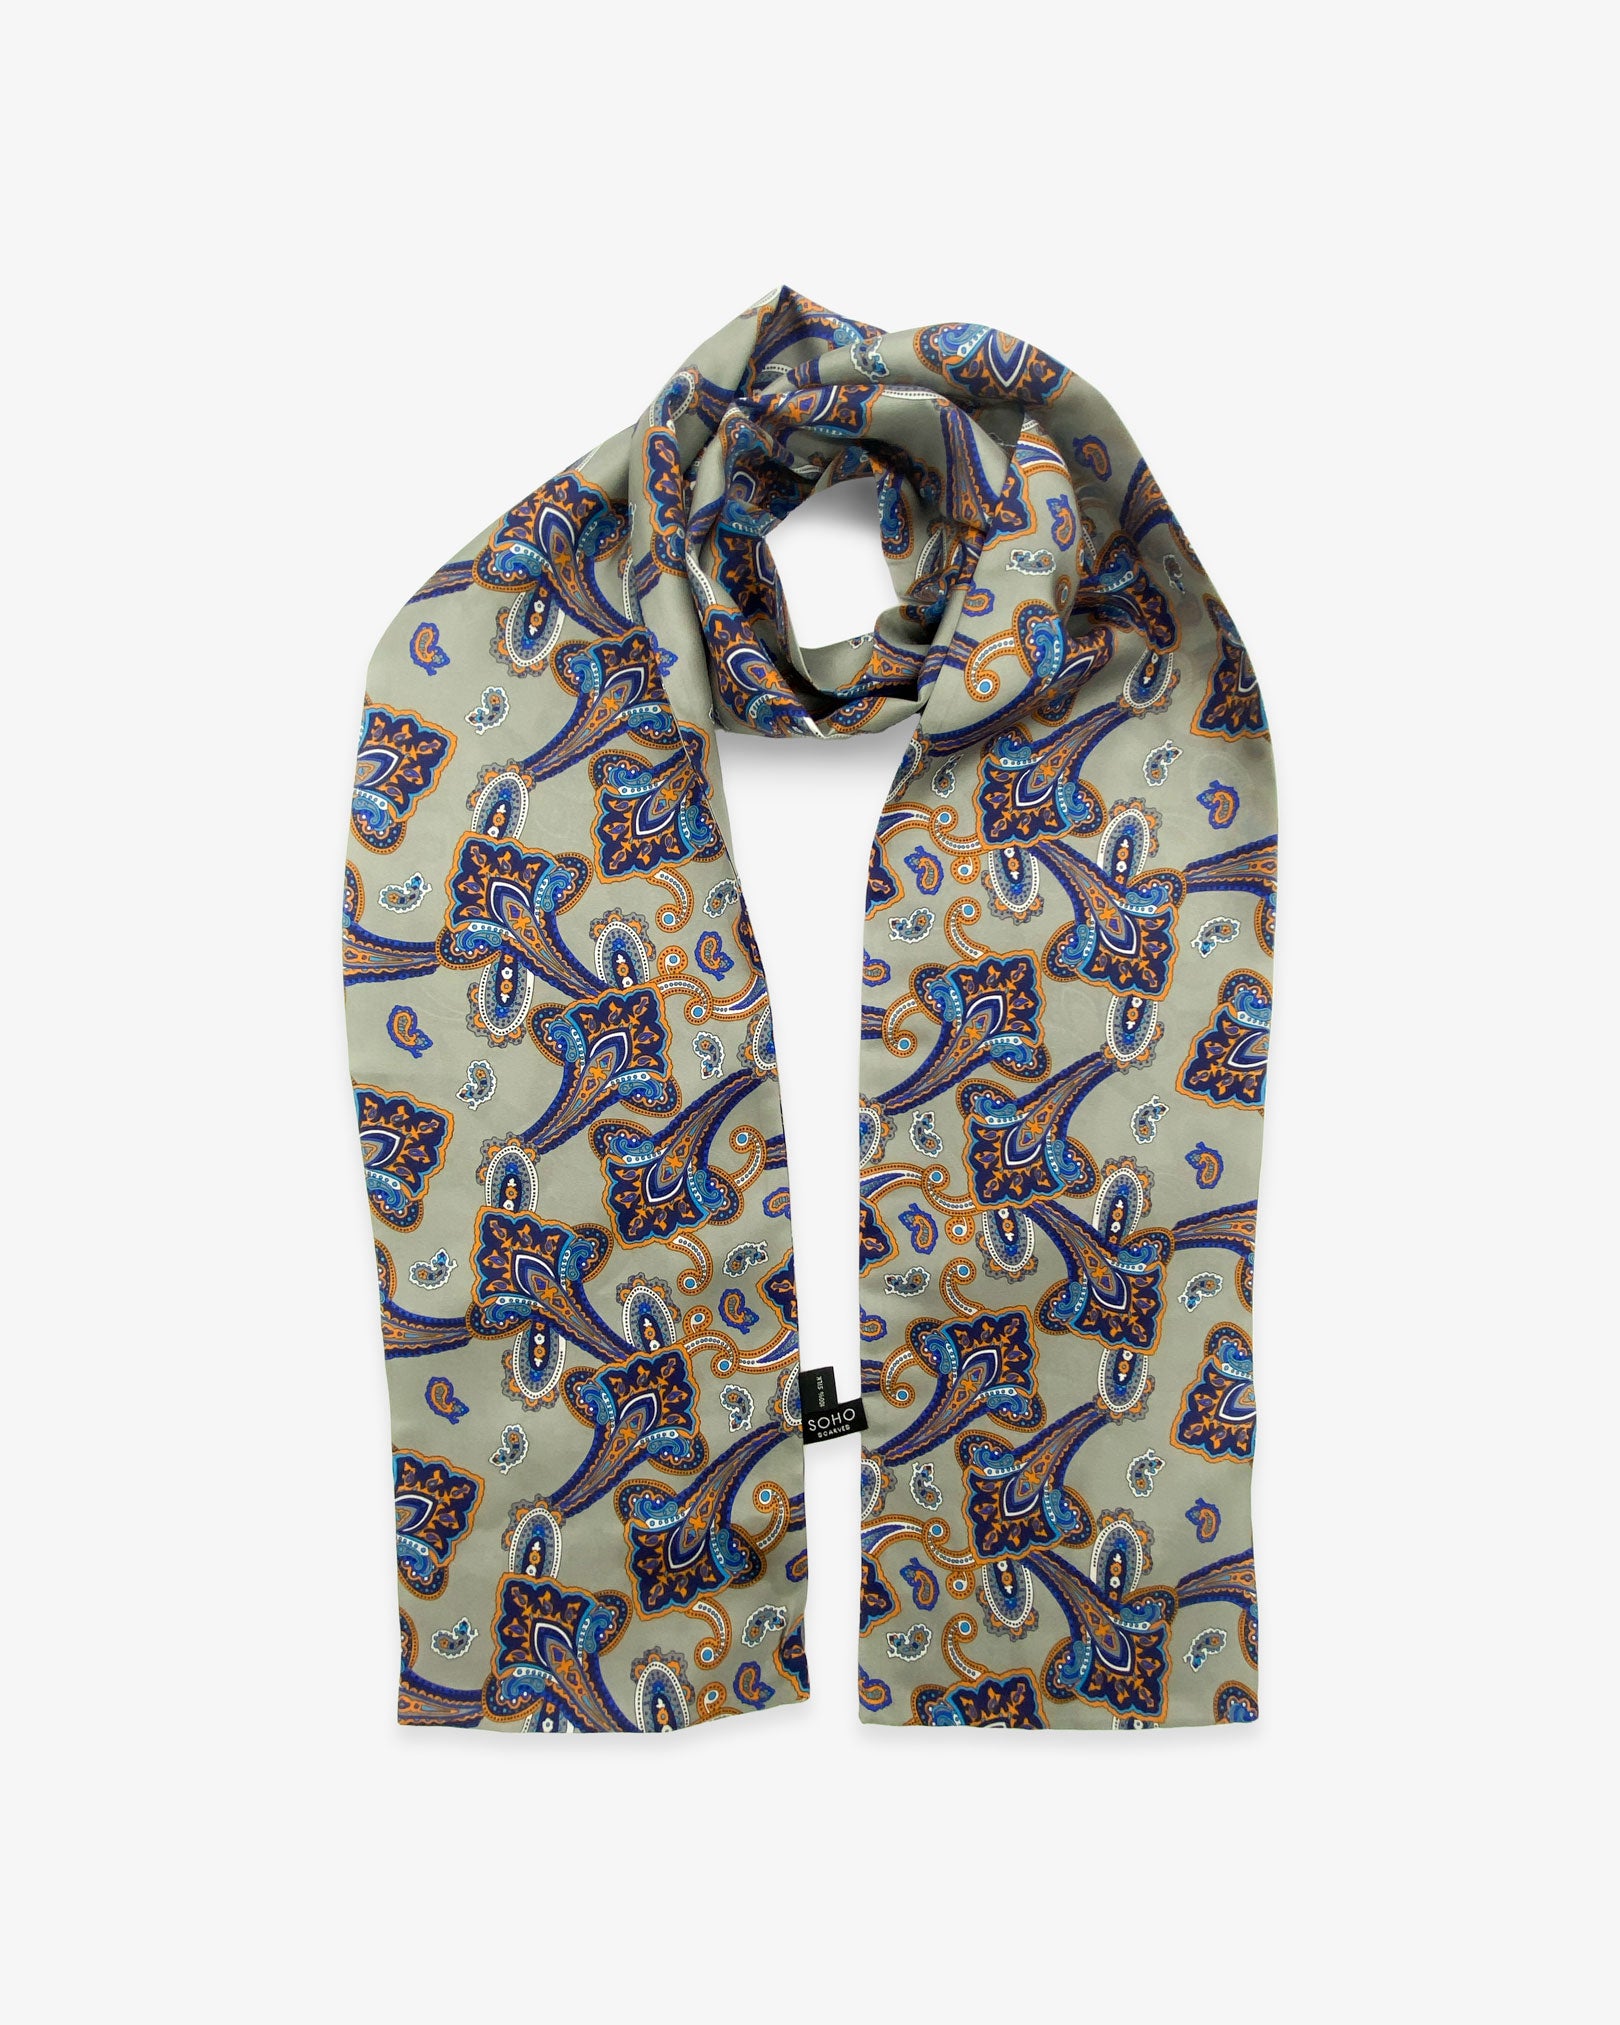 The Tremblant polyester paisley scarf looped in middle with both ends parallel showing the orange and light blue paisley 'trumpets' on a grey-cream ground.